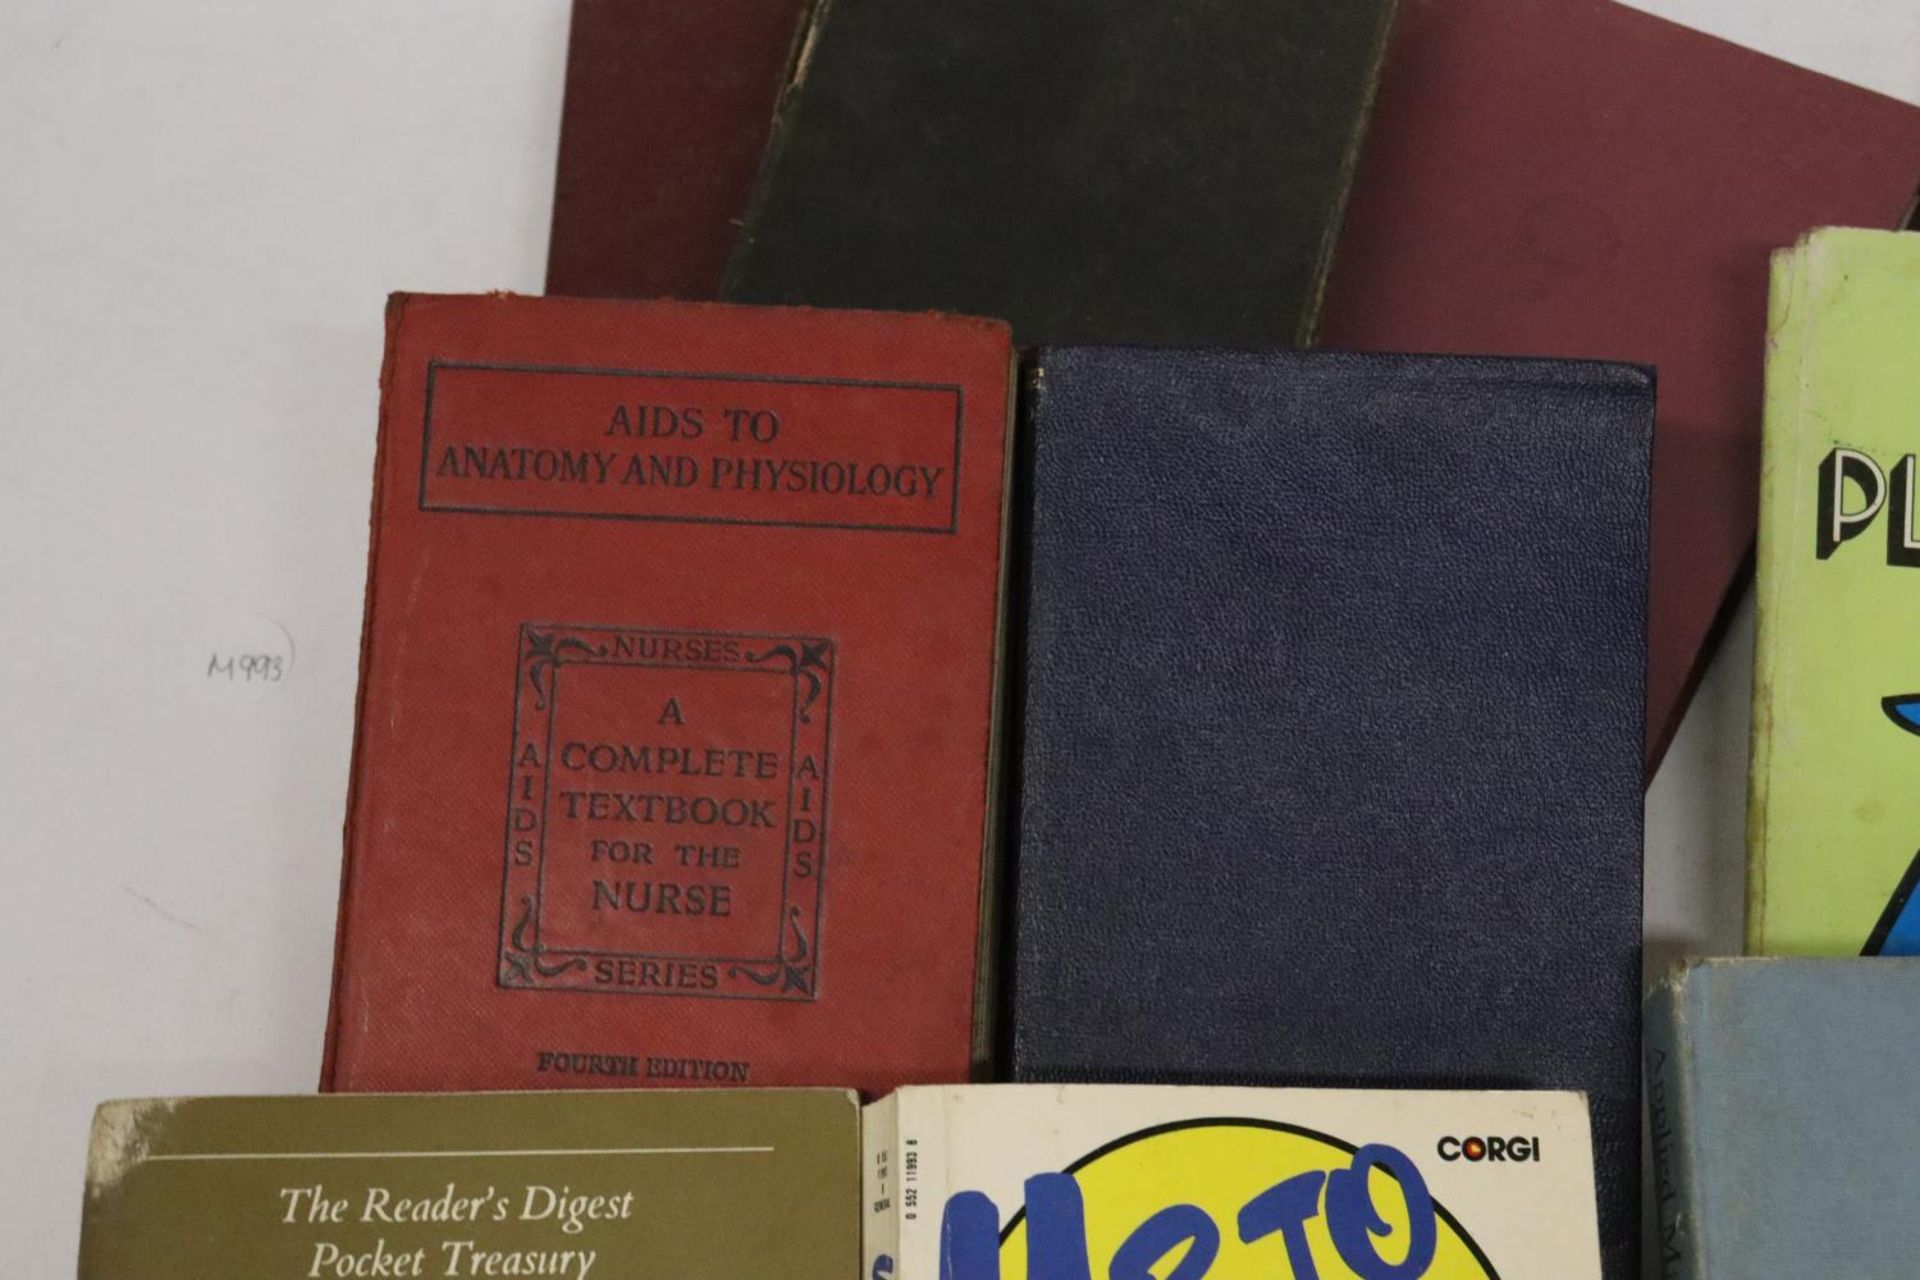 VARIOUS VITNAGE BOOKS TO INCLUDE THE SCIENCES, NURSING, MATHS, BHISTORY ETC - Image 4 of 5